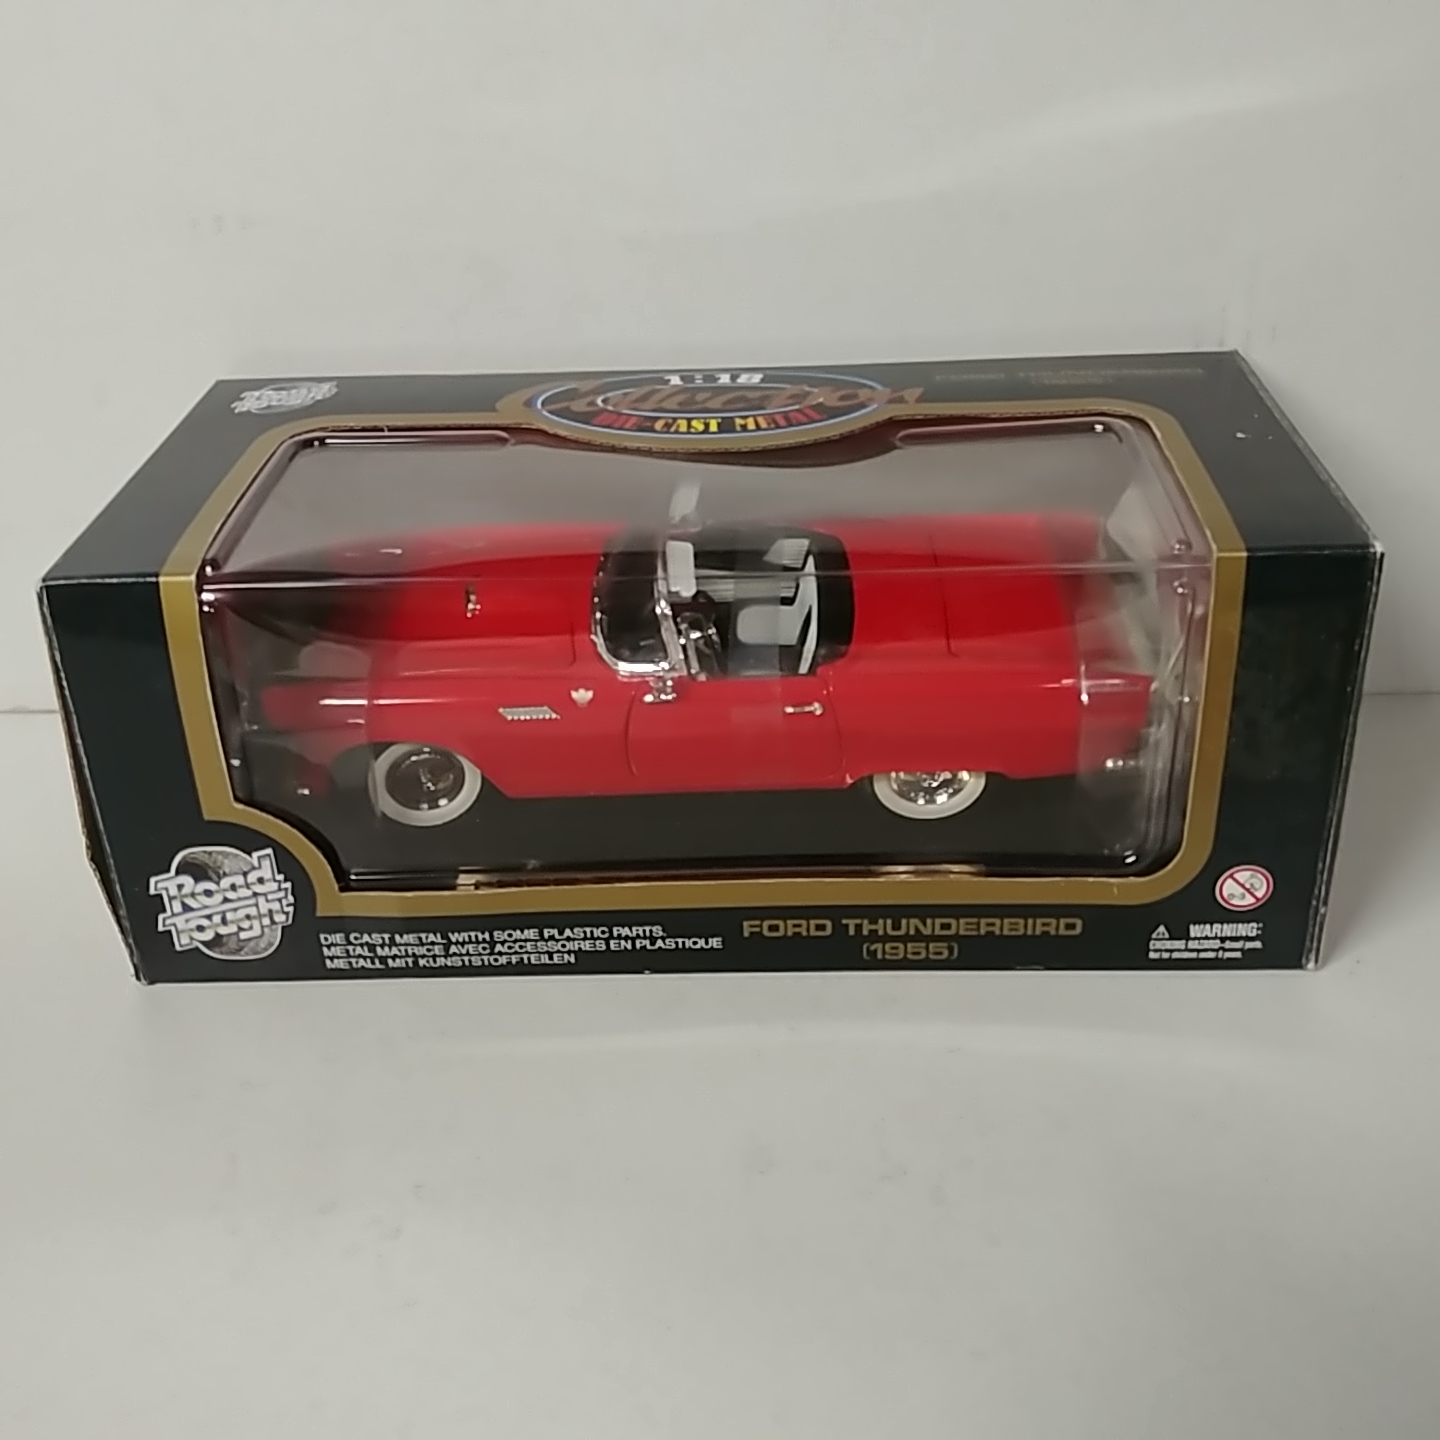 1955 Ford 1/18th Thunderbird Convertible Red